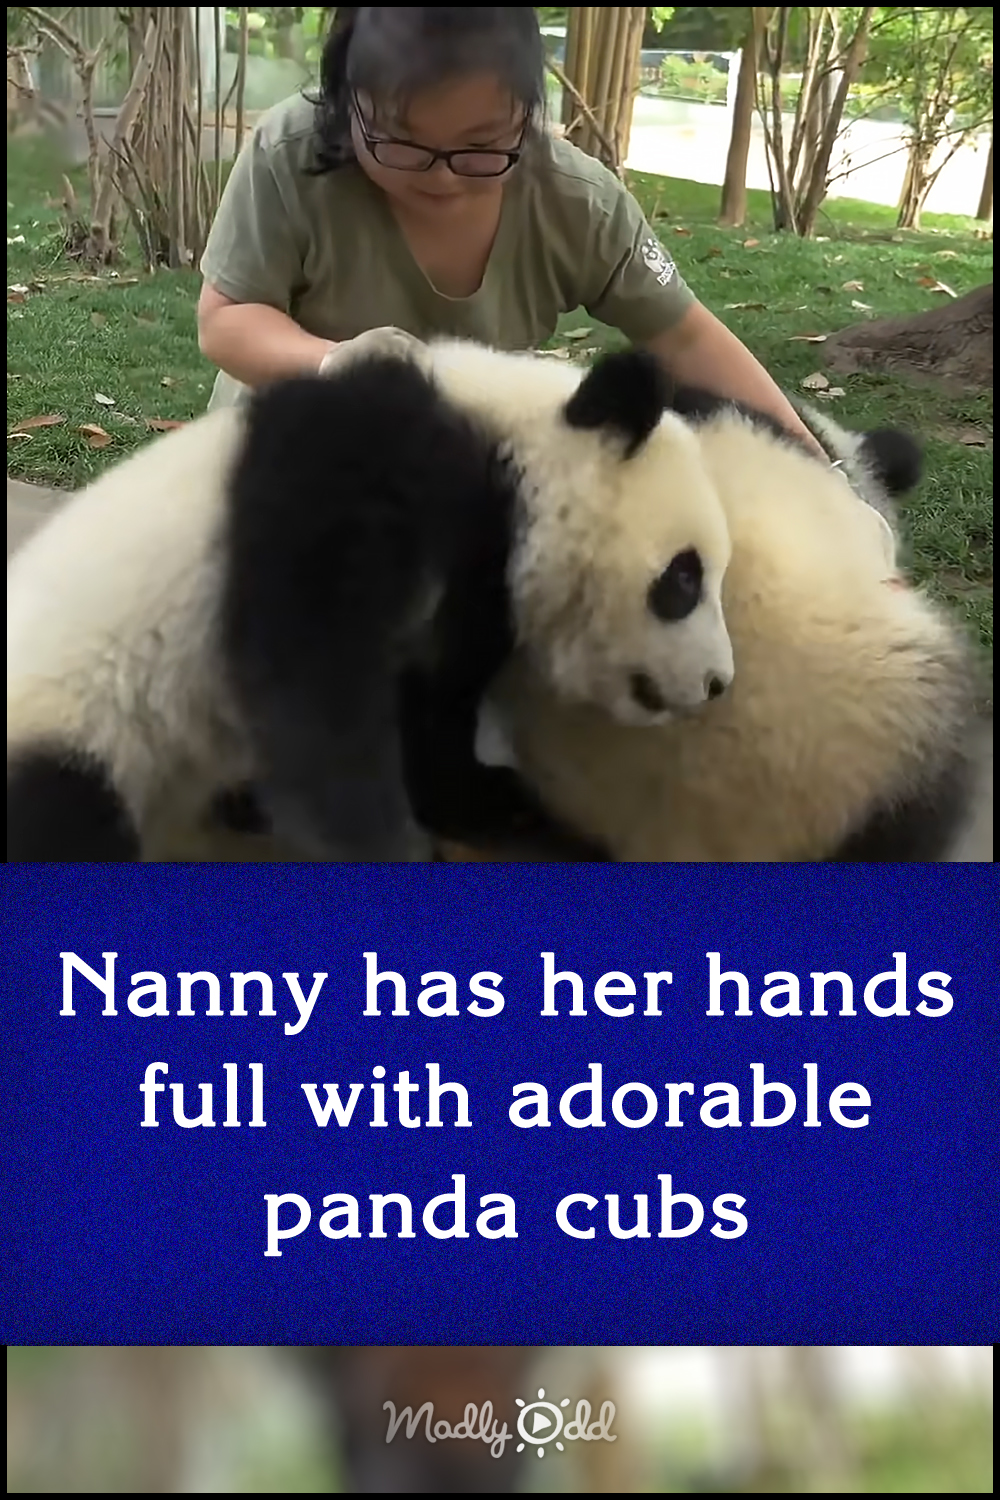 Nanny has her hands full with adorable panda cubs